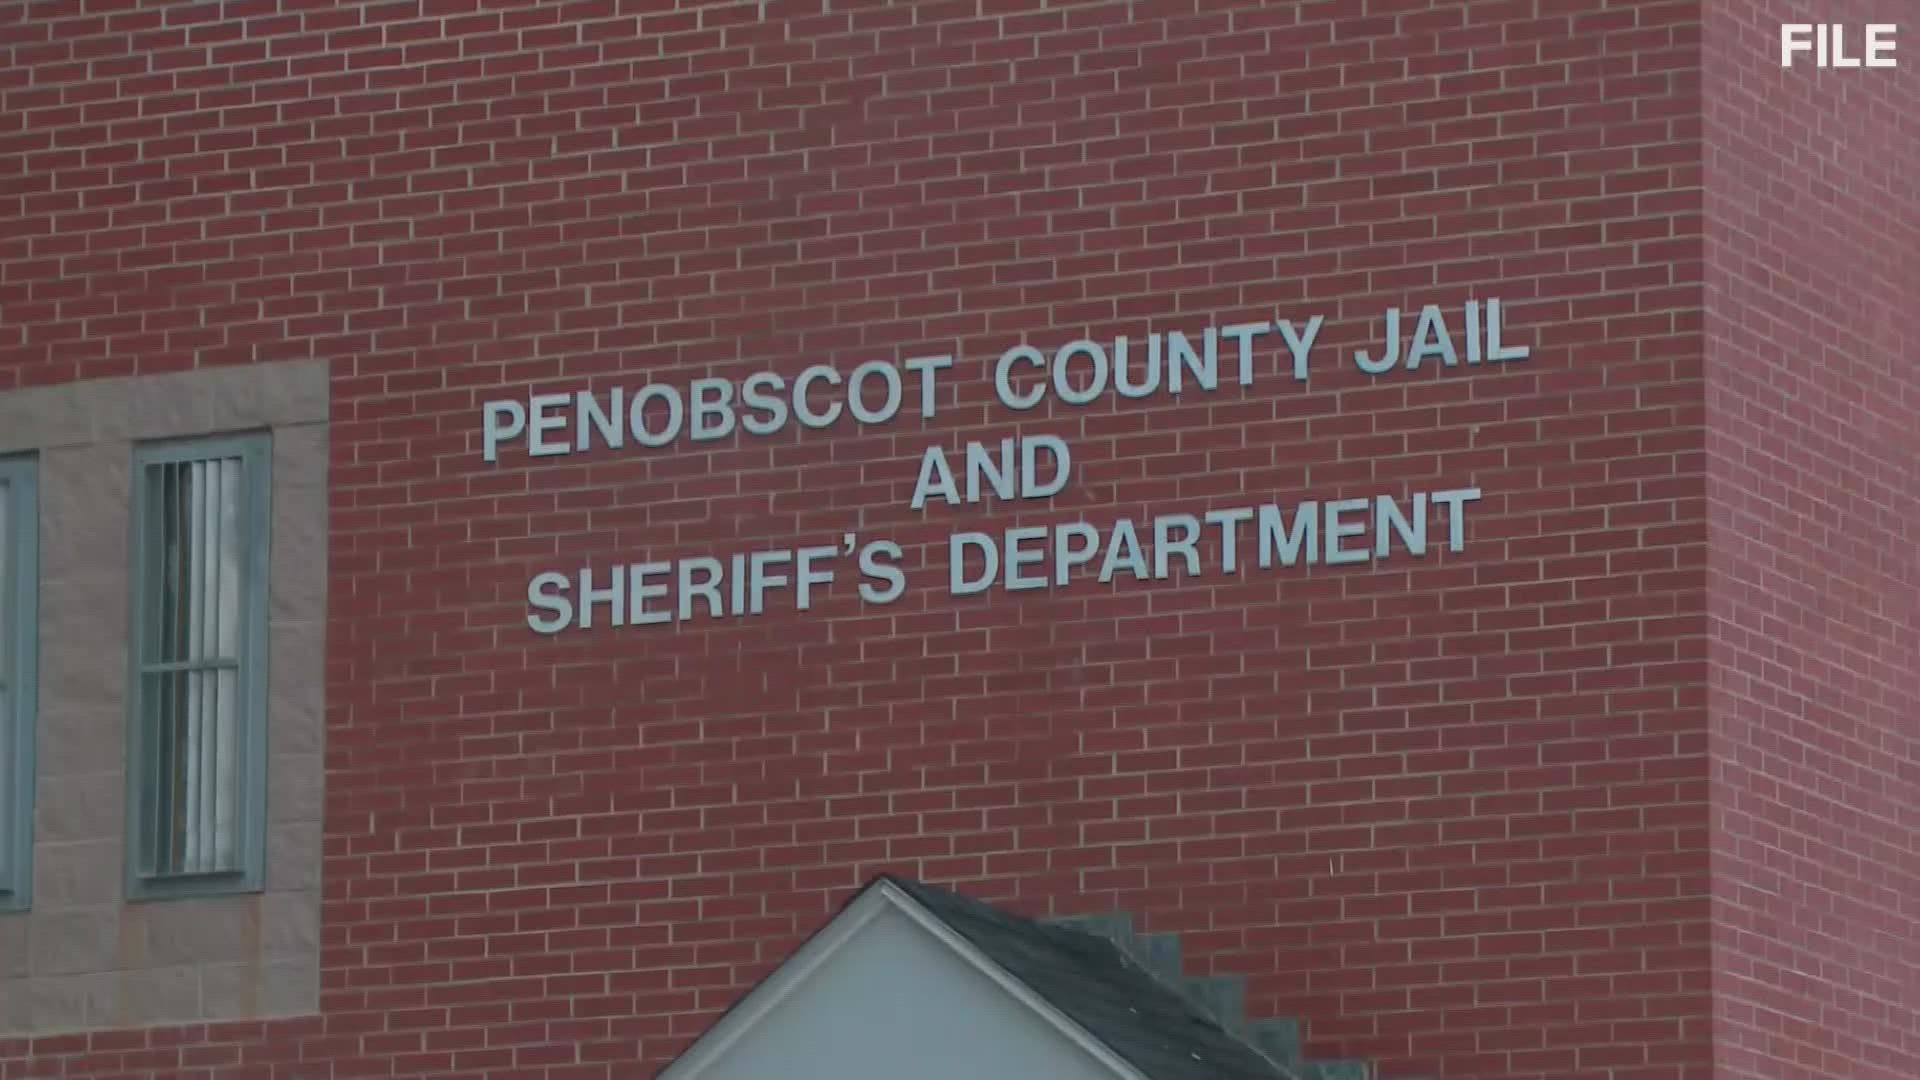 Penobscot County Sheriff Troy Morton says that there are currently 193 inmates at the jail, and 12 of them have tested positive for Covid-19 and are in isolation.